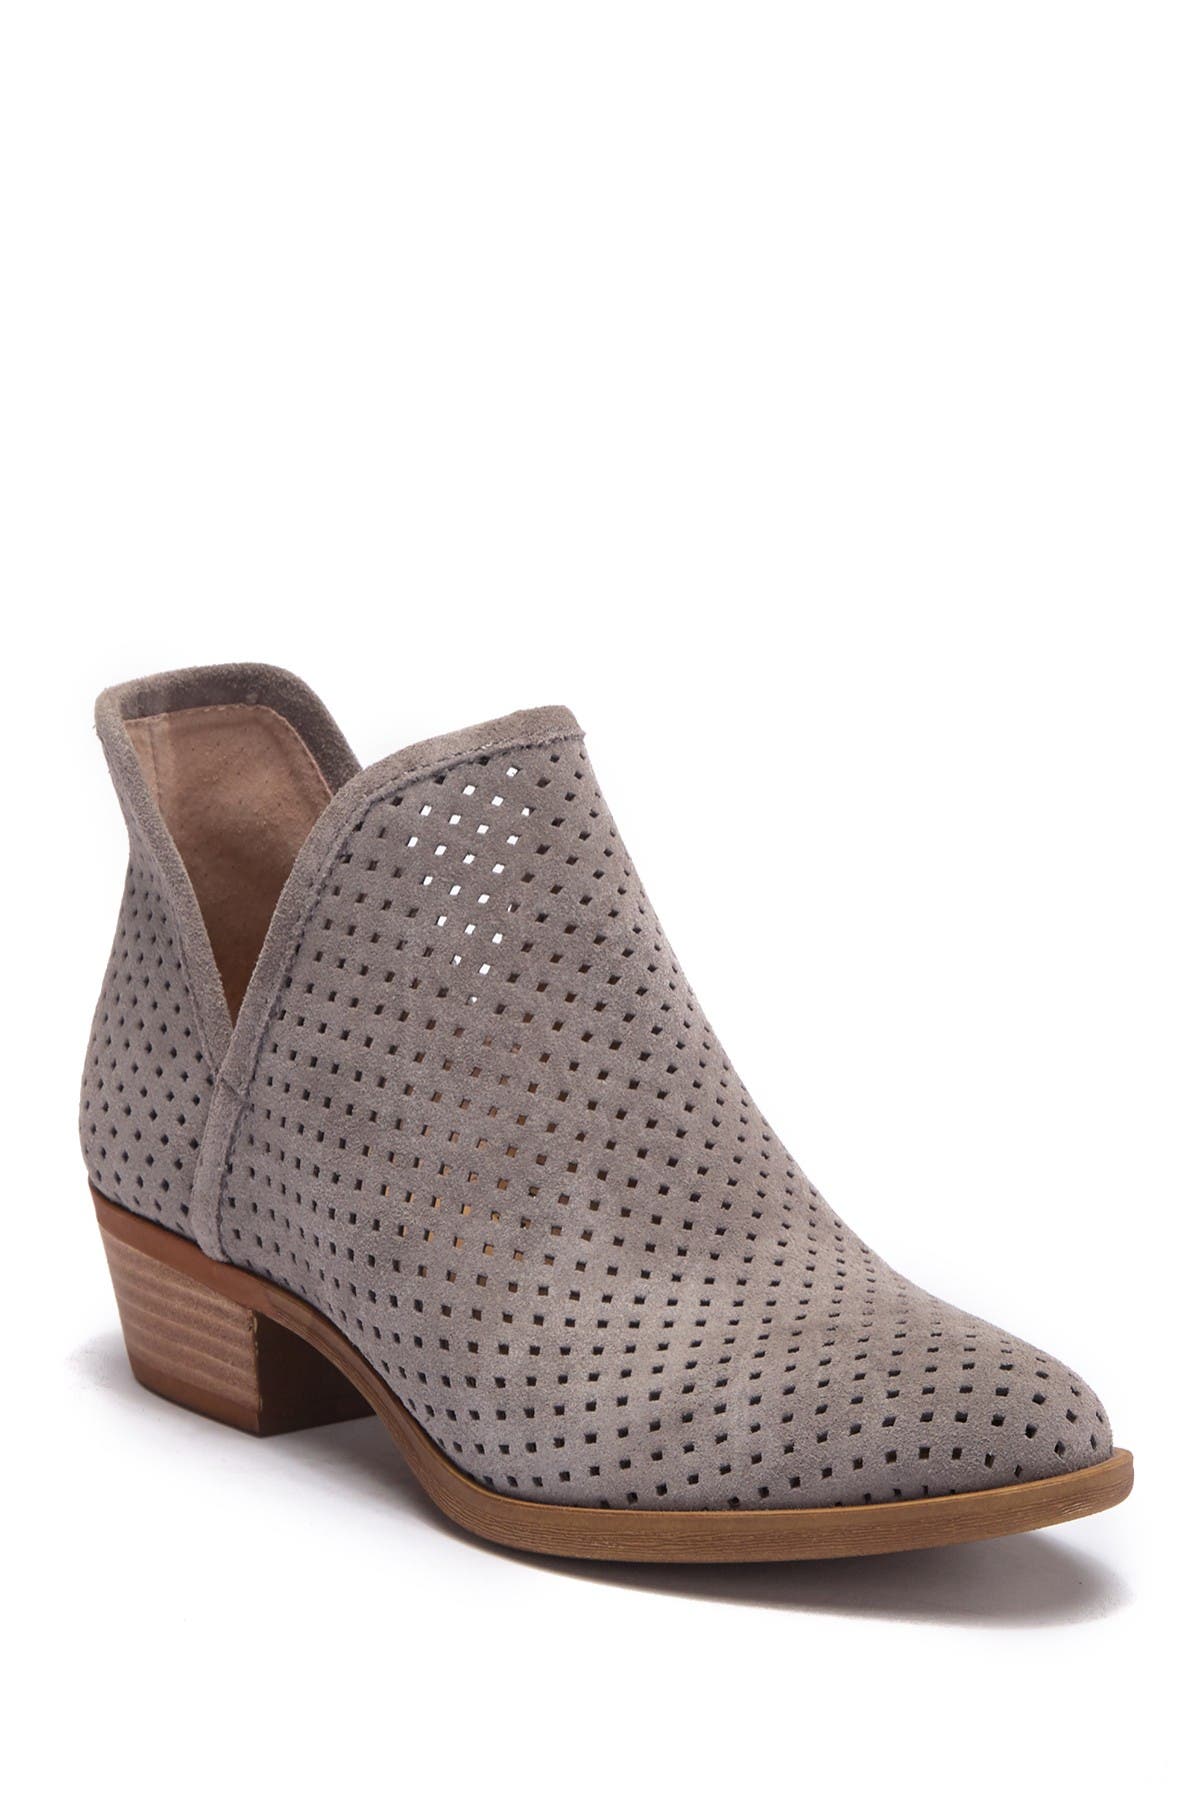 Lucky Brand | Brooklin Perforated Suede 